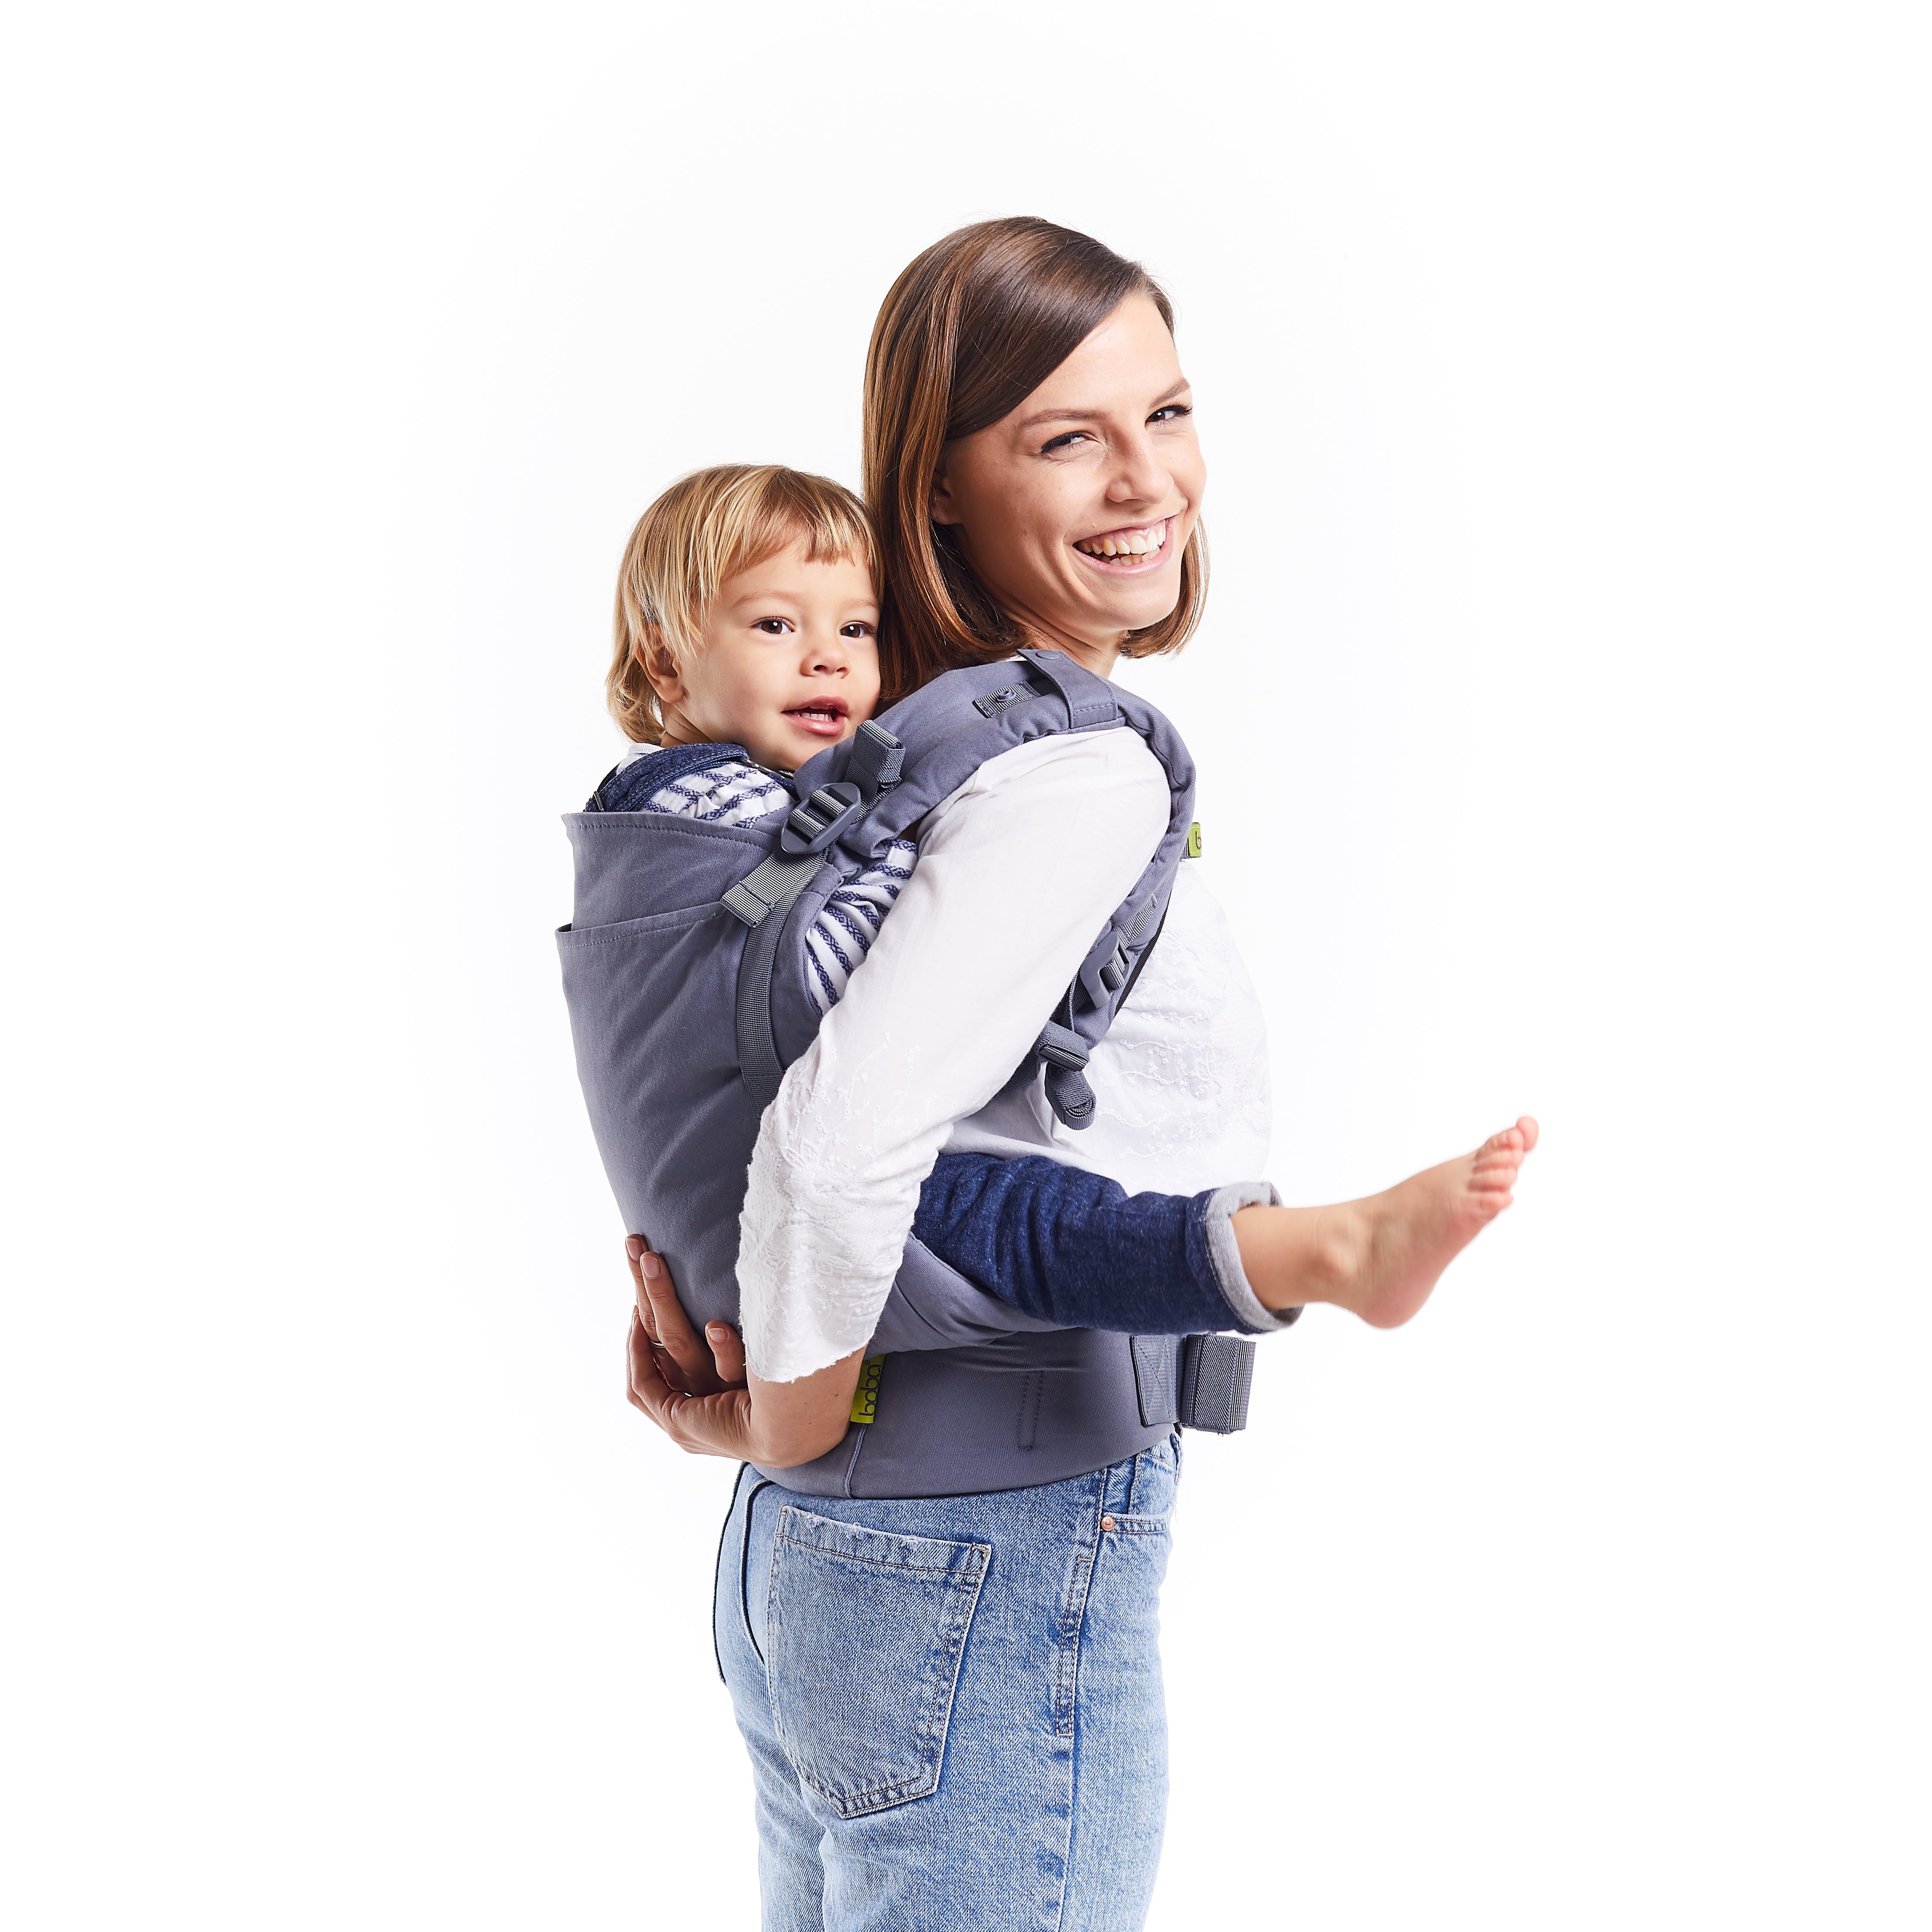 A happy young mom with her toddler girl in a back carry ergonomic position in the gray boba x